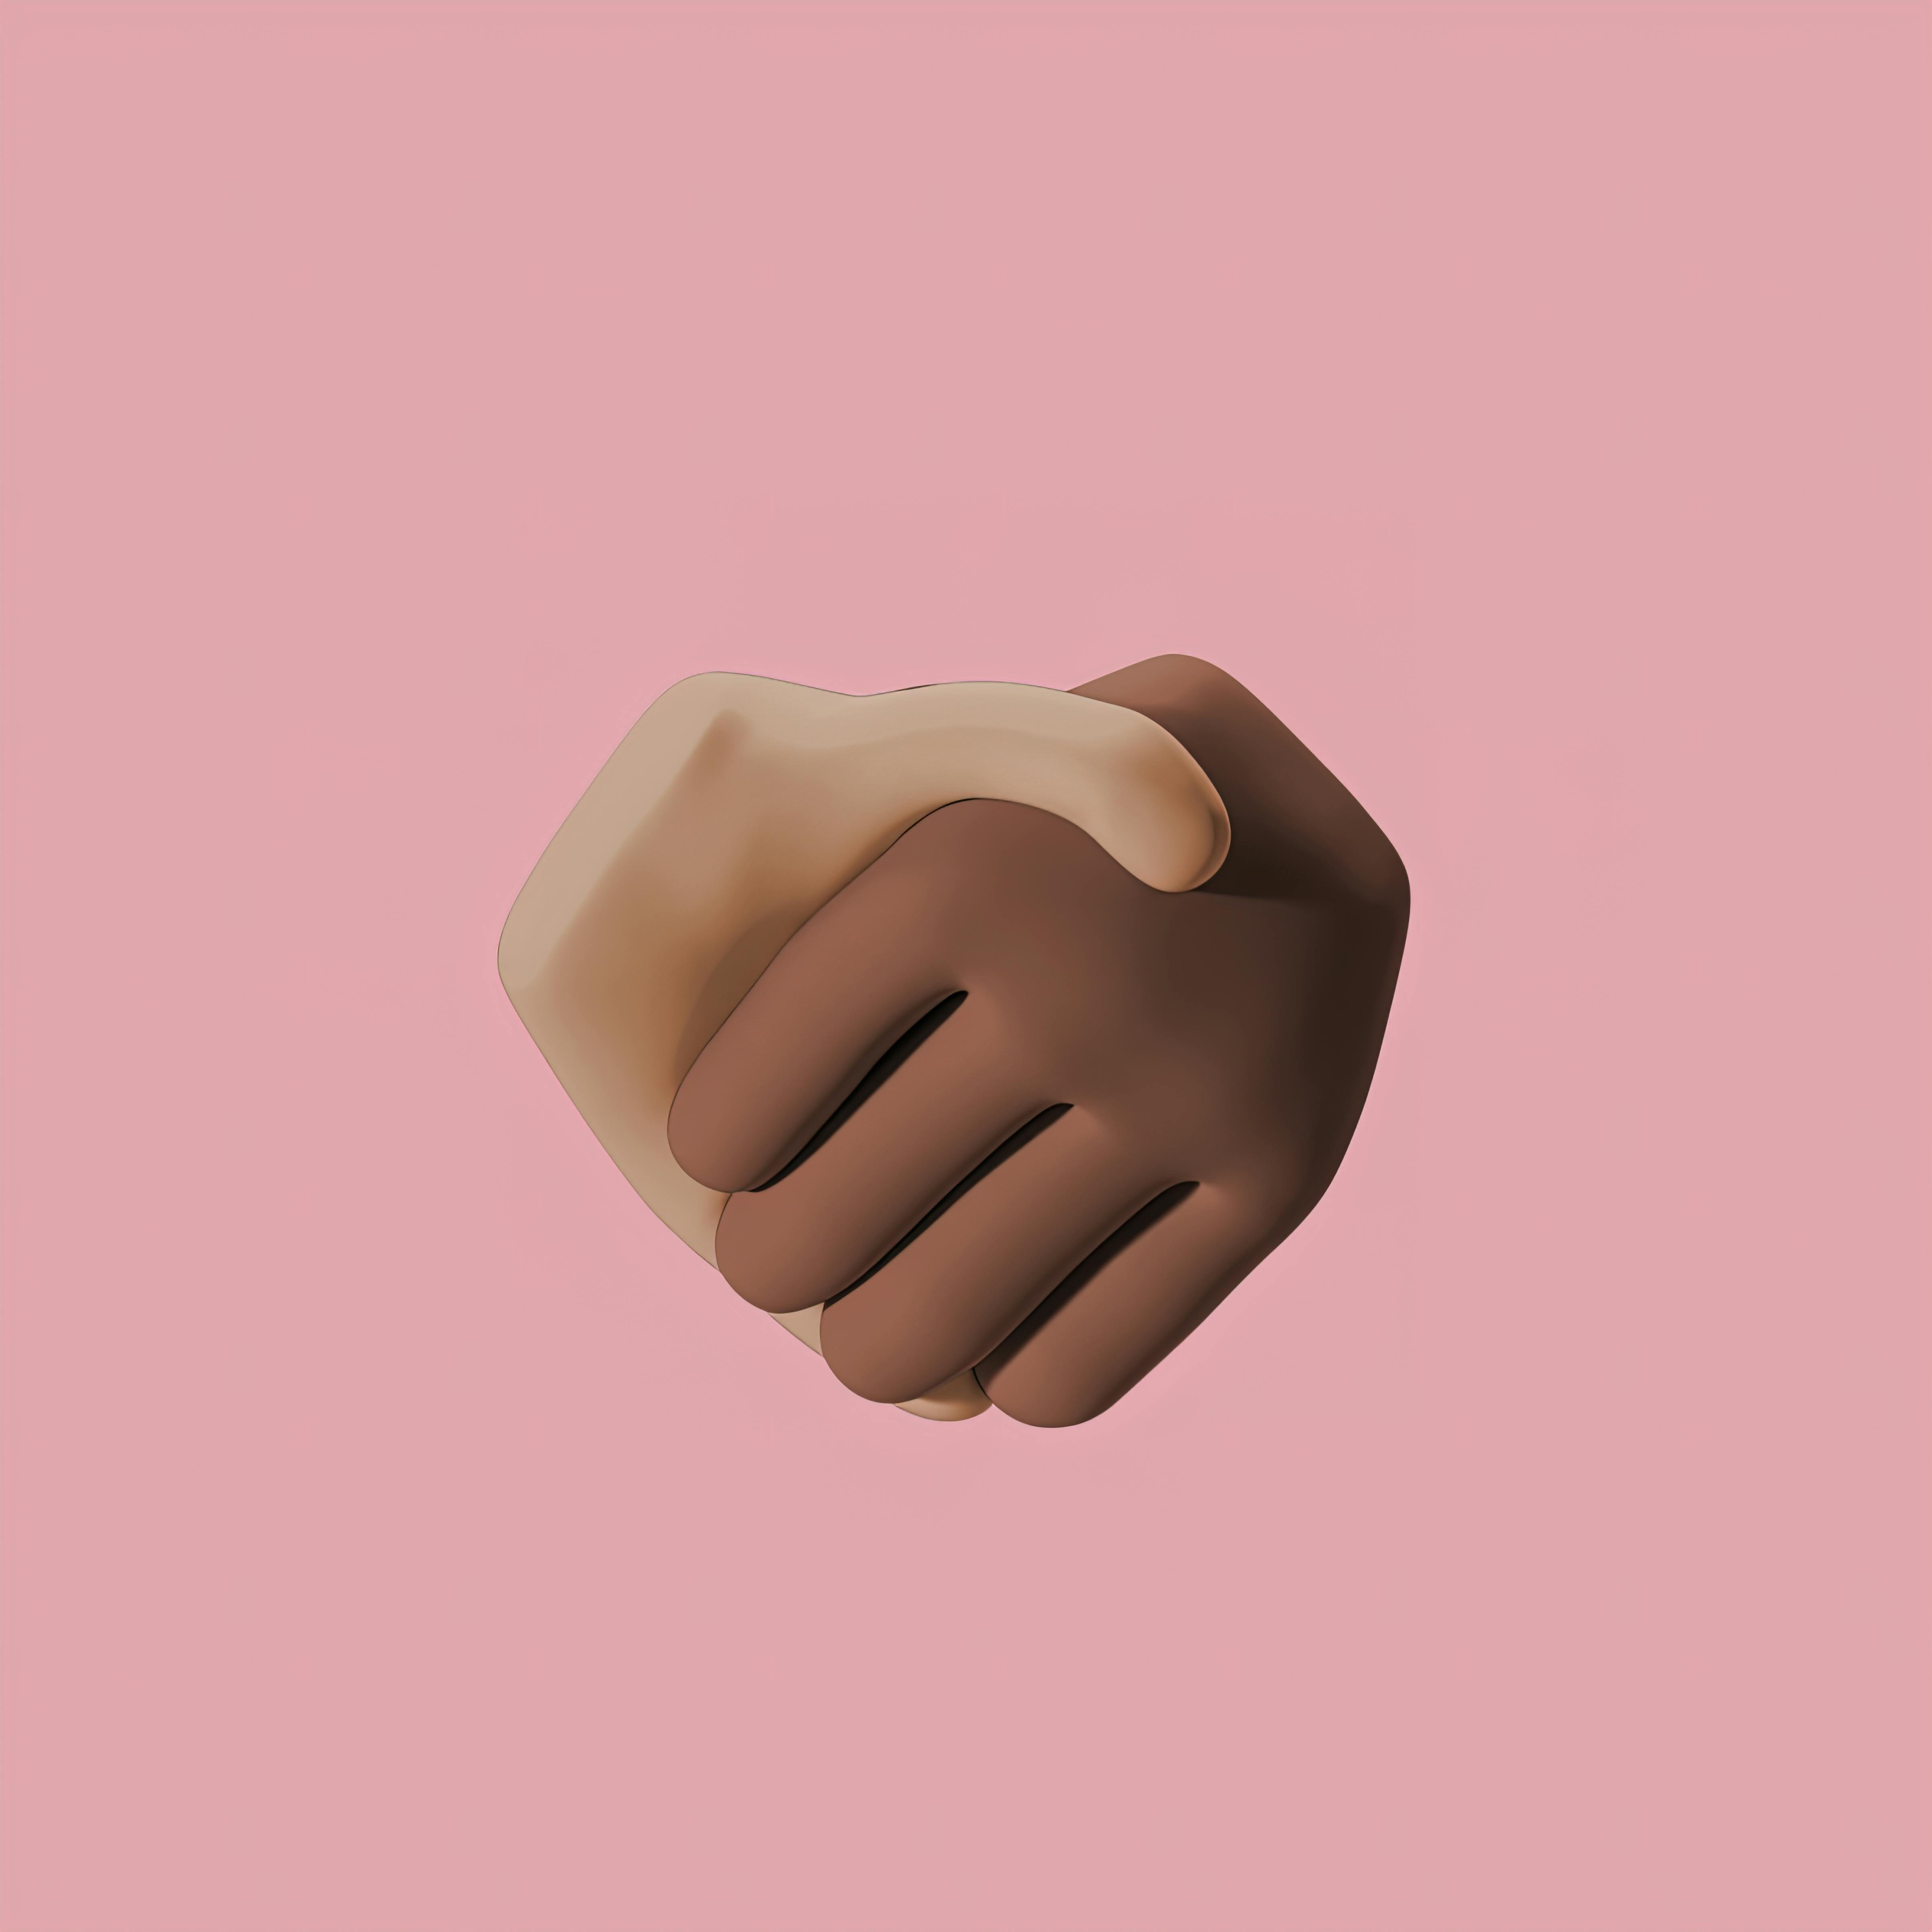 A 3D Illustration of a Handshake · Free Stock Photo